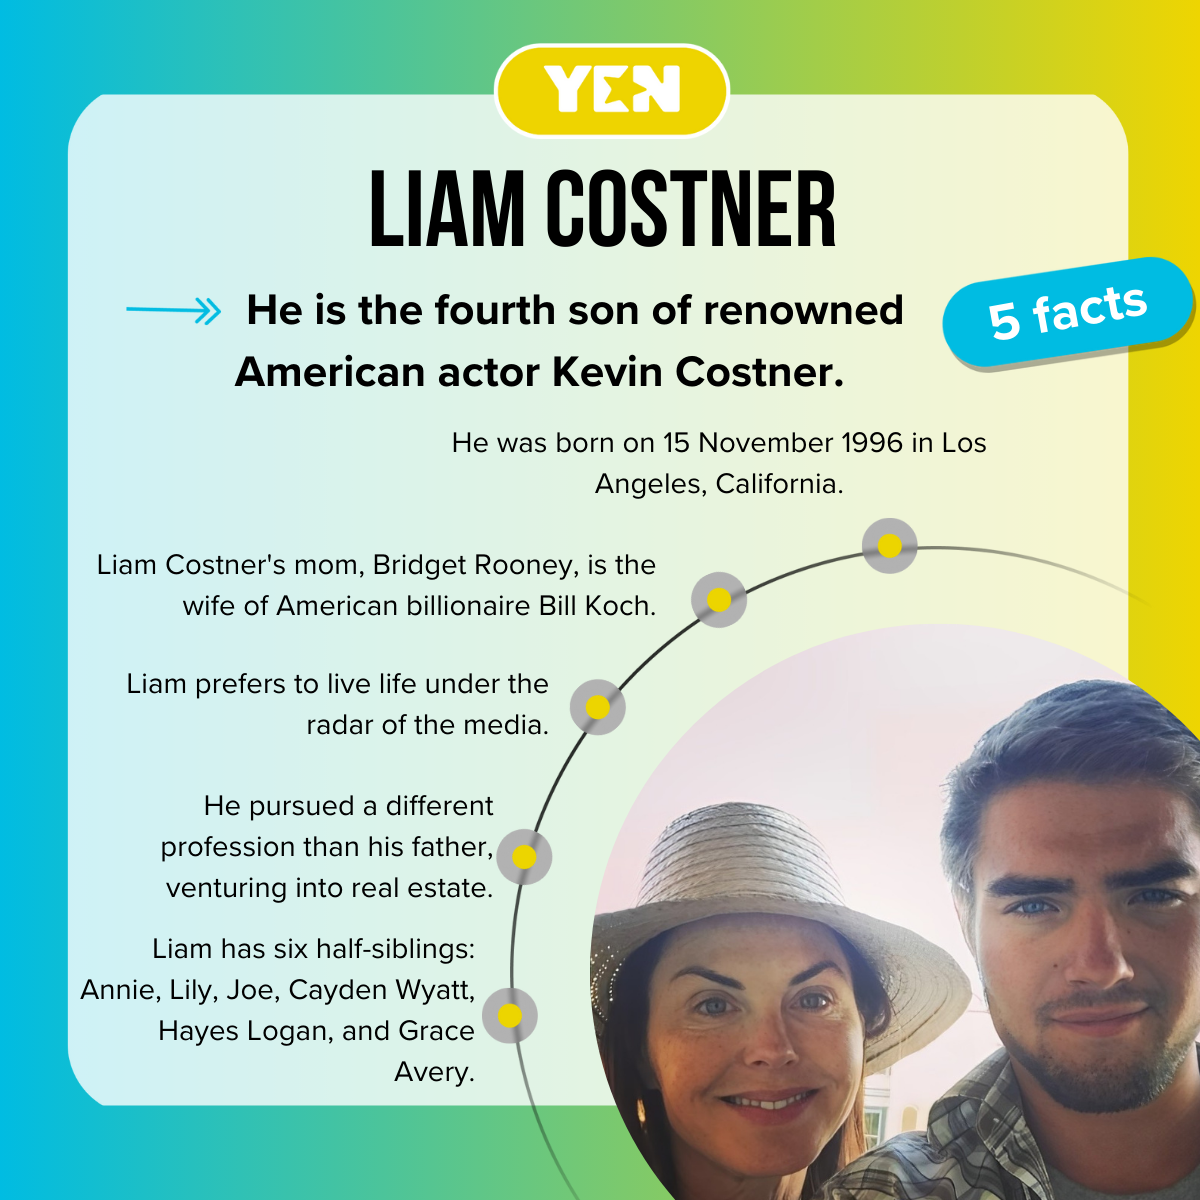 Five facts about Liam Costner.